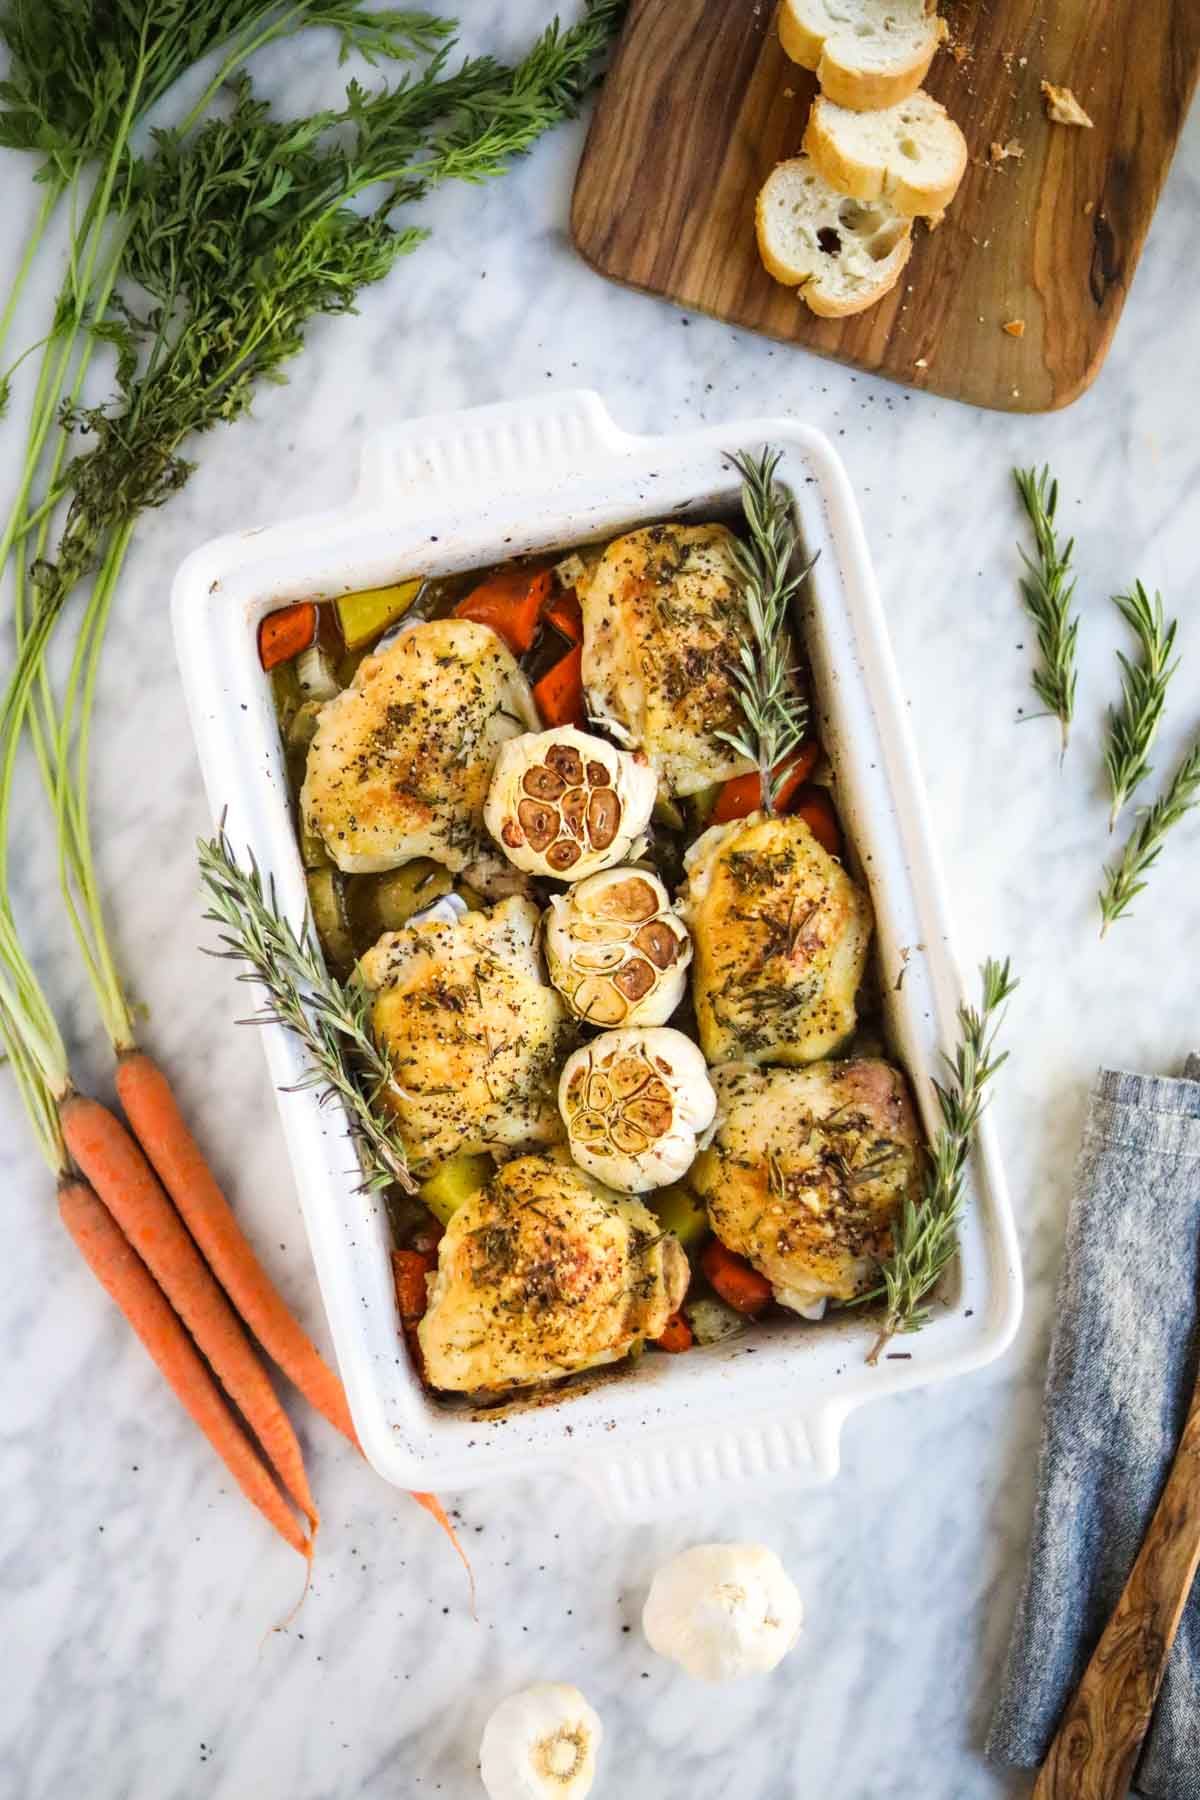 Scrumptious roasted chicken thighs and vegetables in a white casserole.